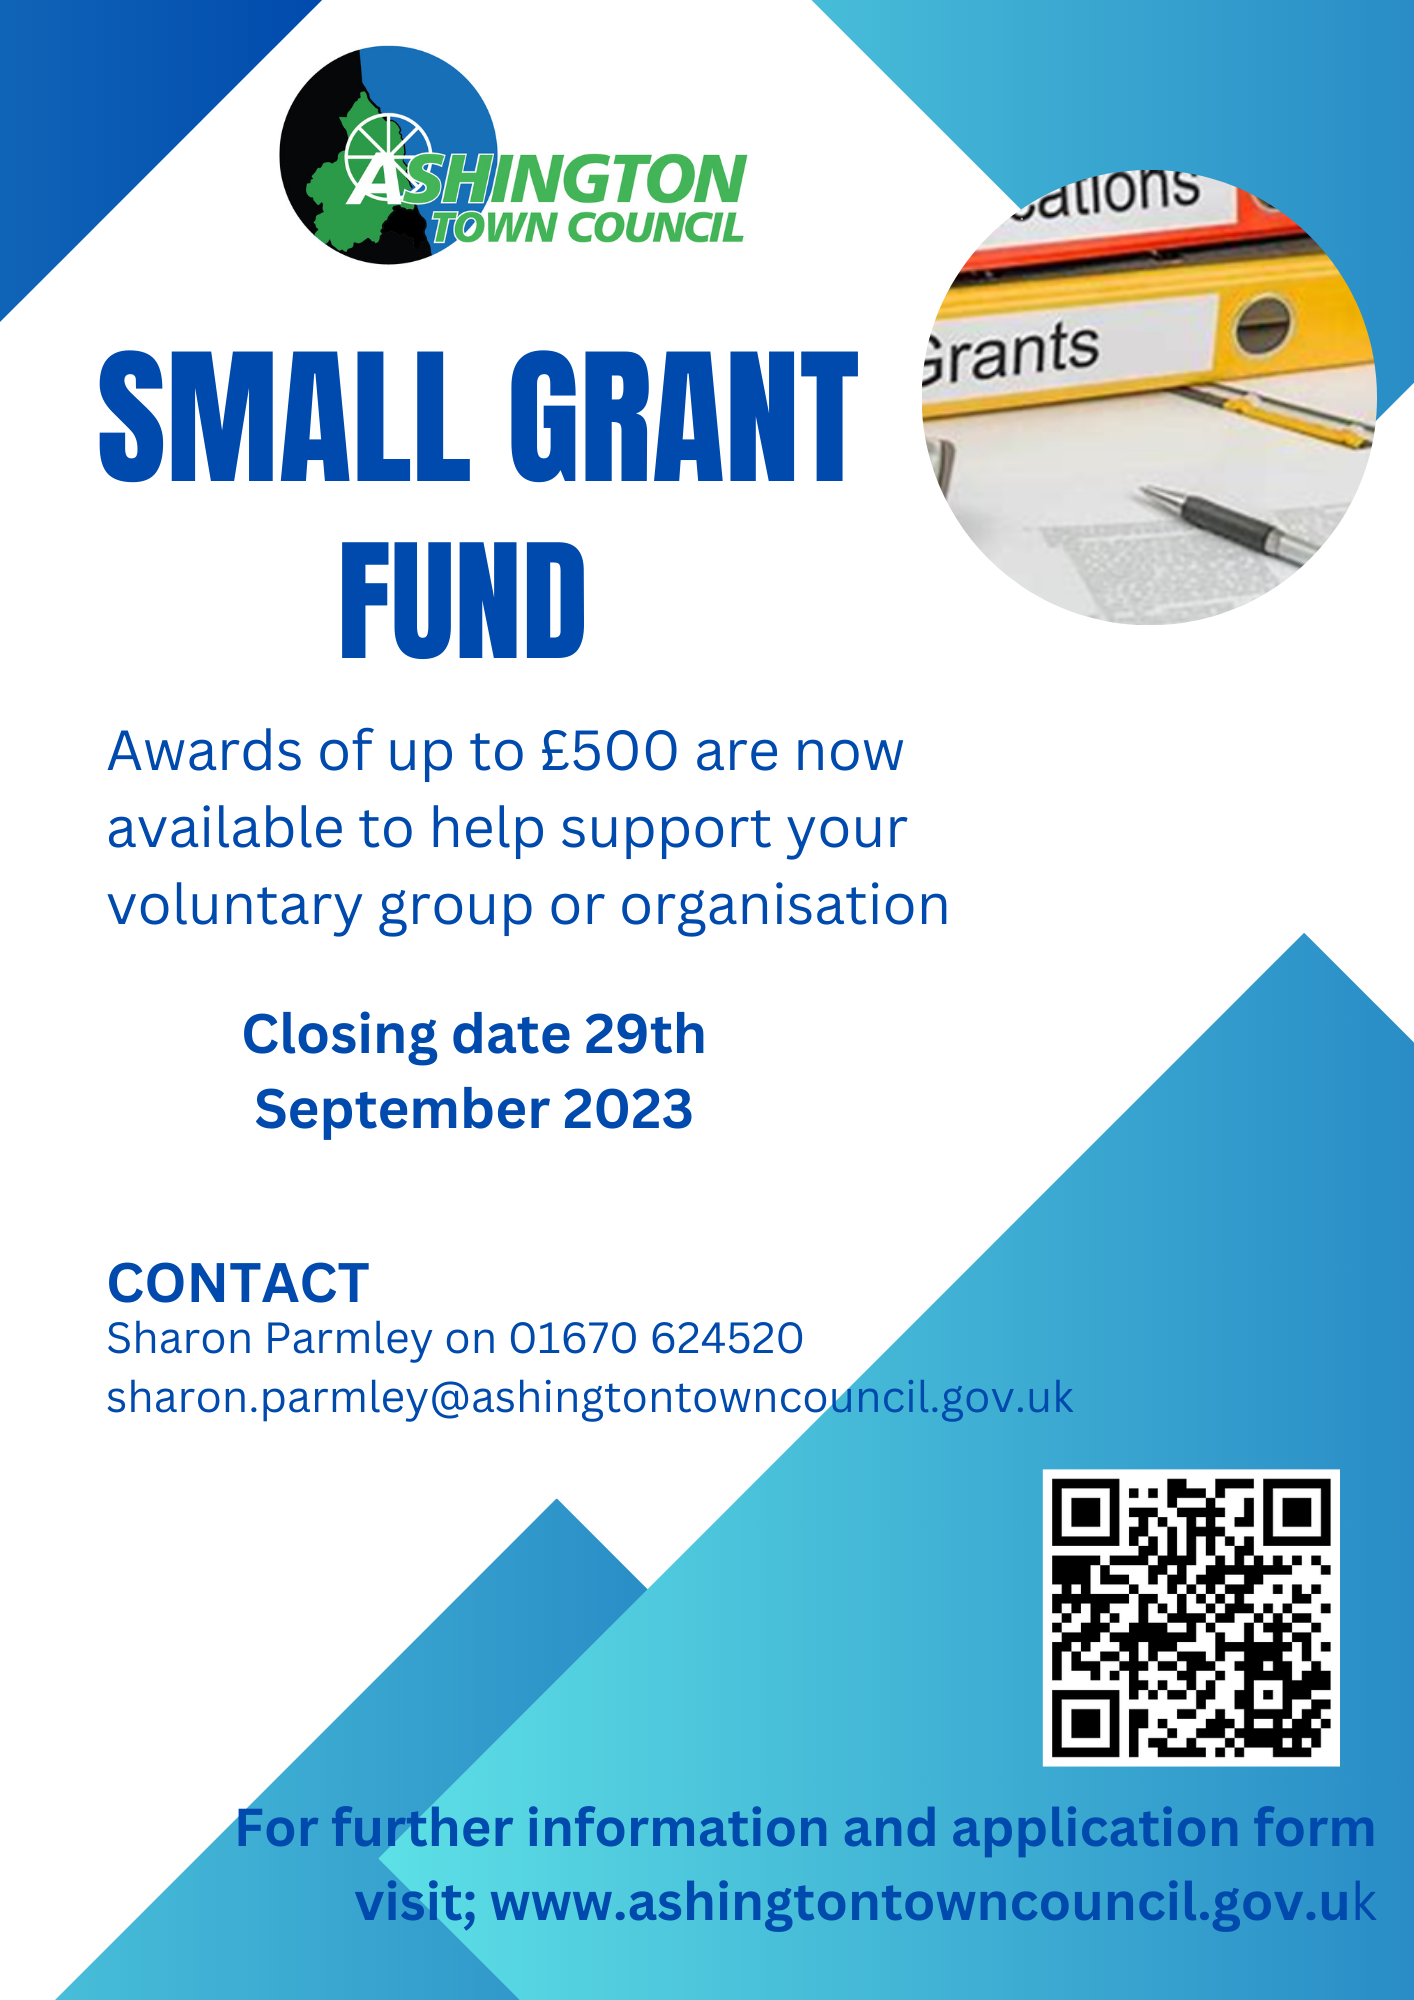 Small Grant Fund Now Open for Applications